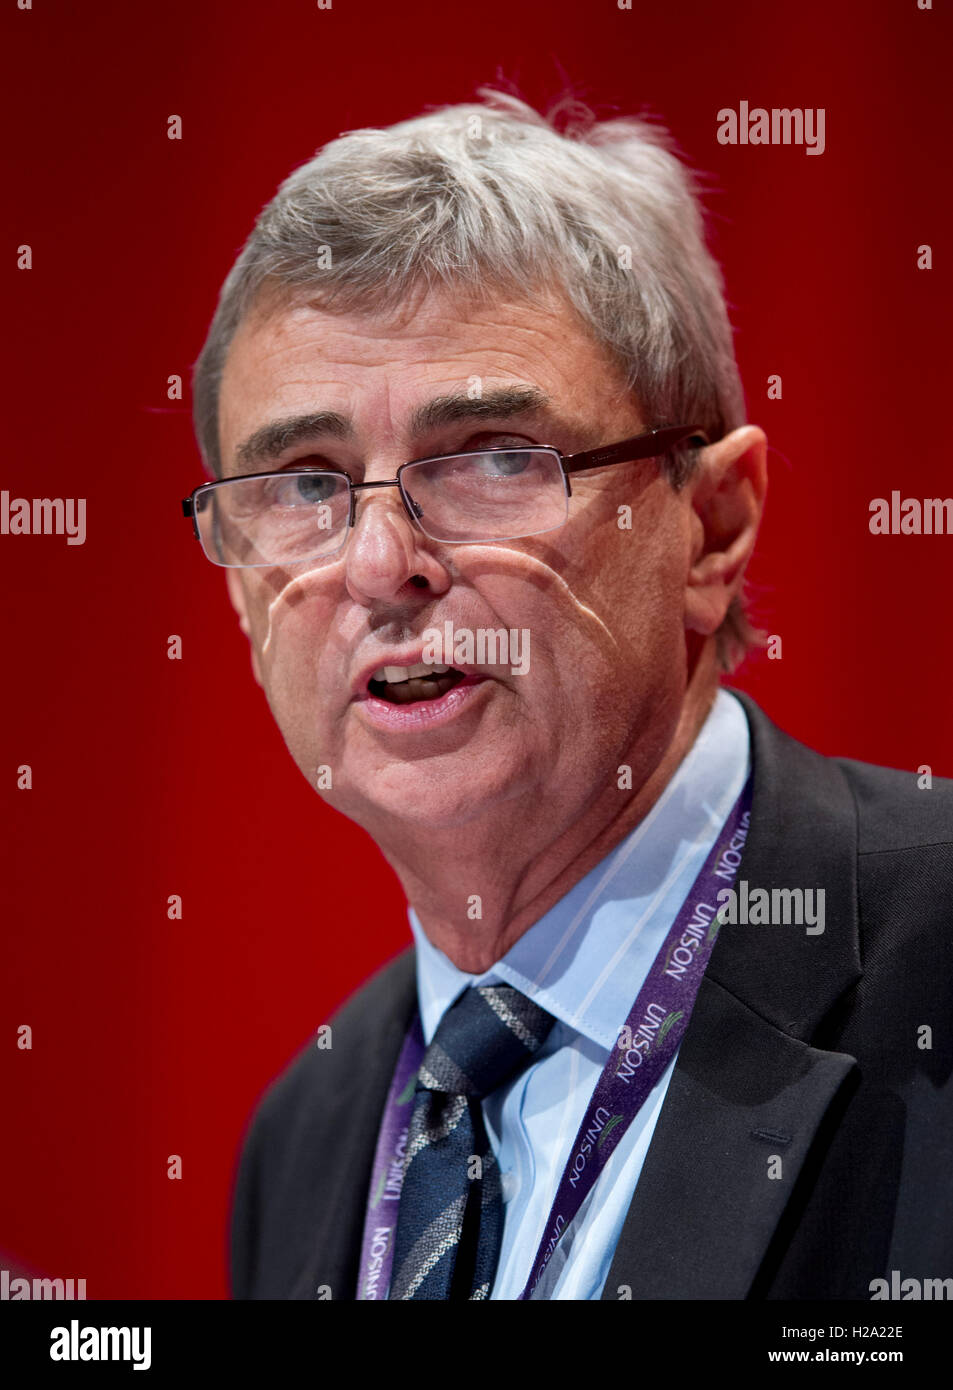 Liverpool, UK. 26th September 2016. General Secretary of UNISON Dave Prentis speaks at day two of the Labour Party Conference in Liverpool. Credit:  Russell Hart/Alamy Live News. Stock Photo